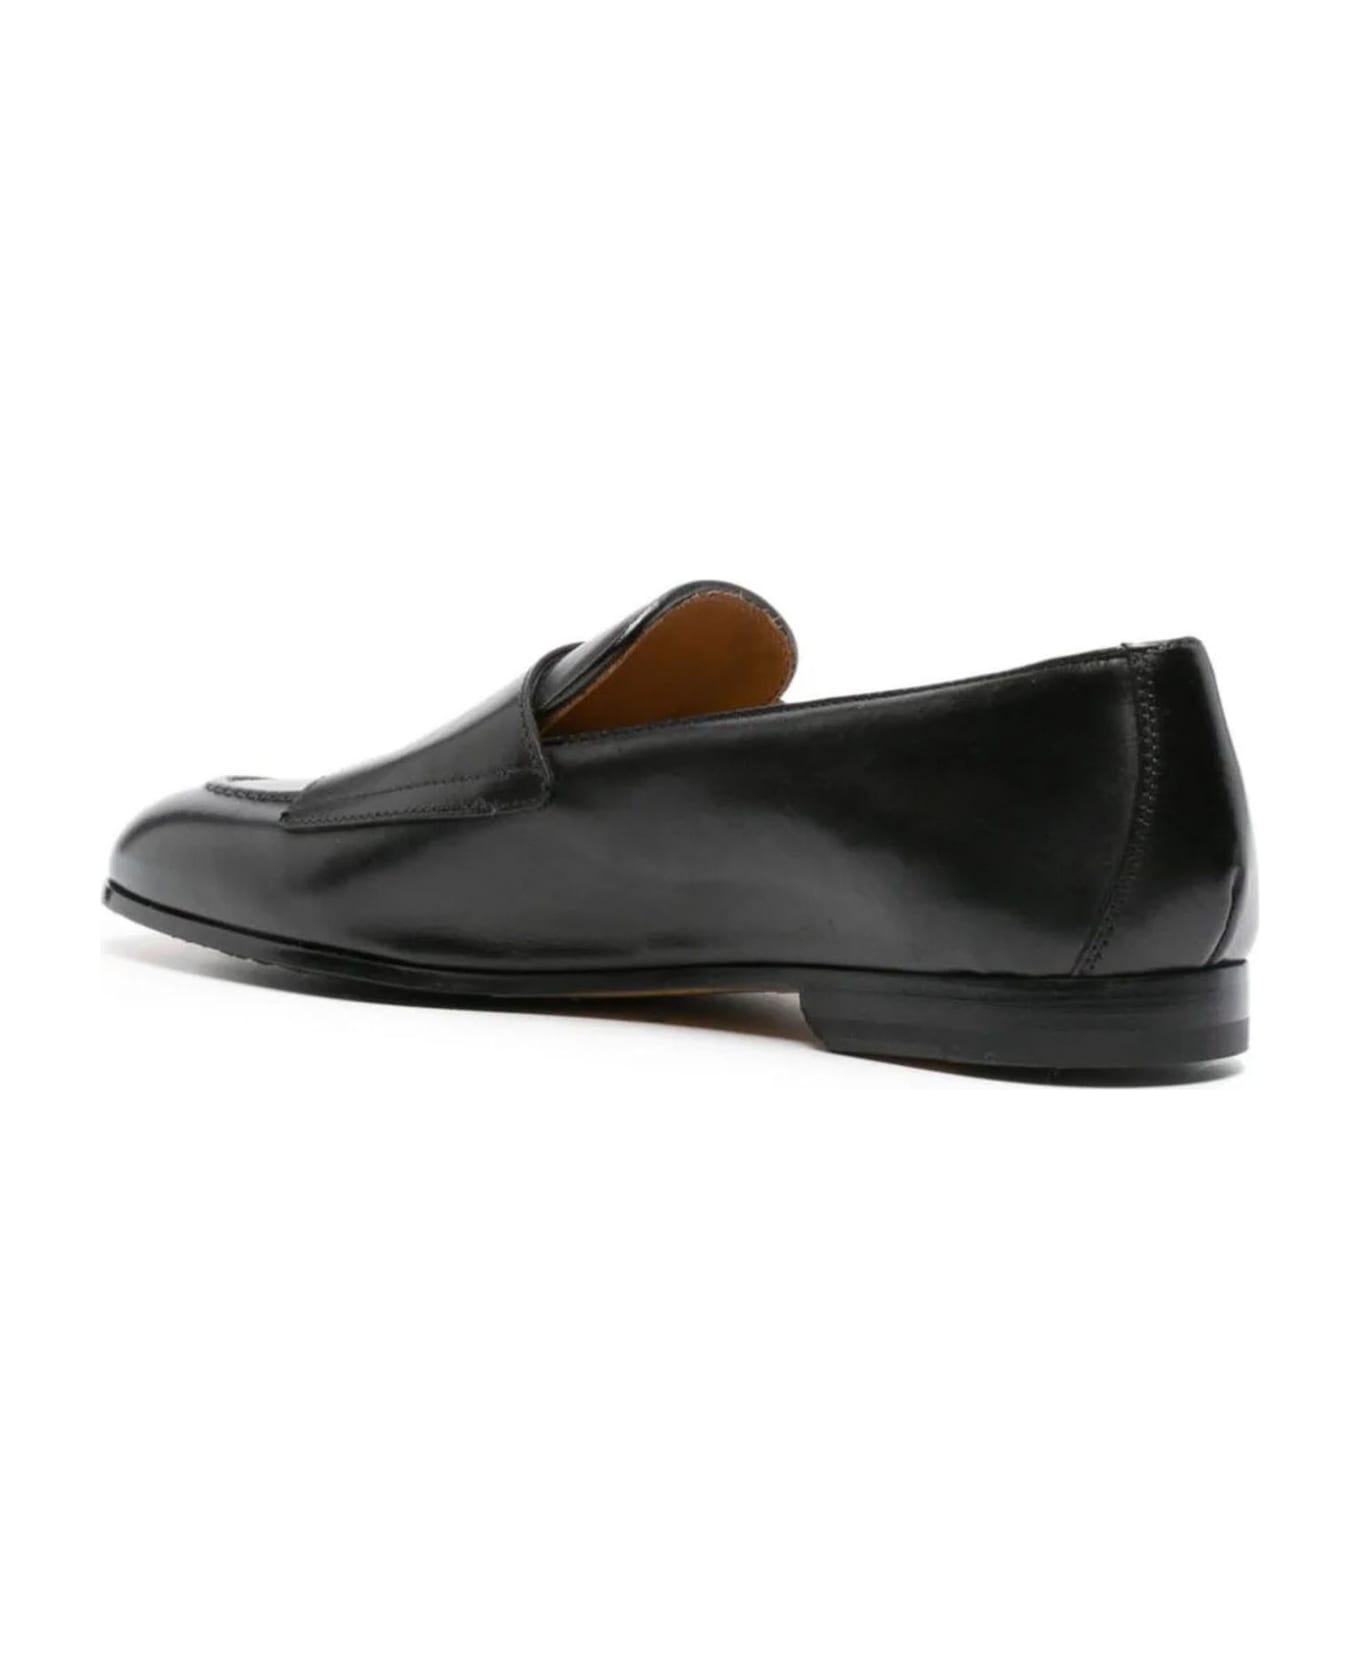 Doucal's Double-buckle Loafer In Black Leather - Black